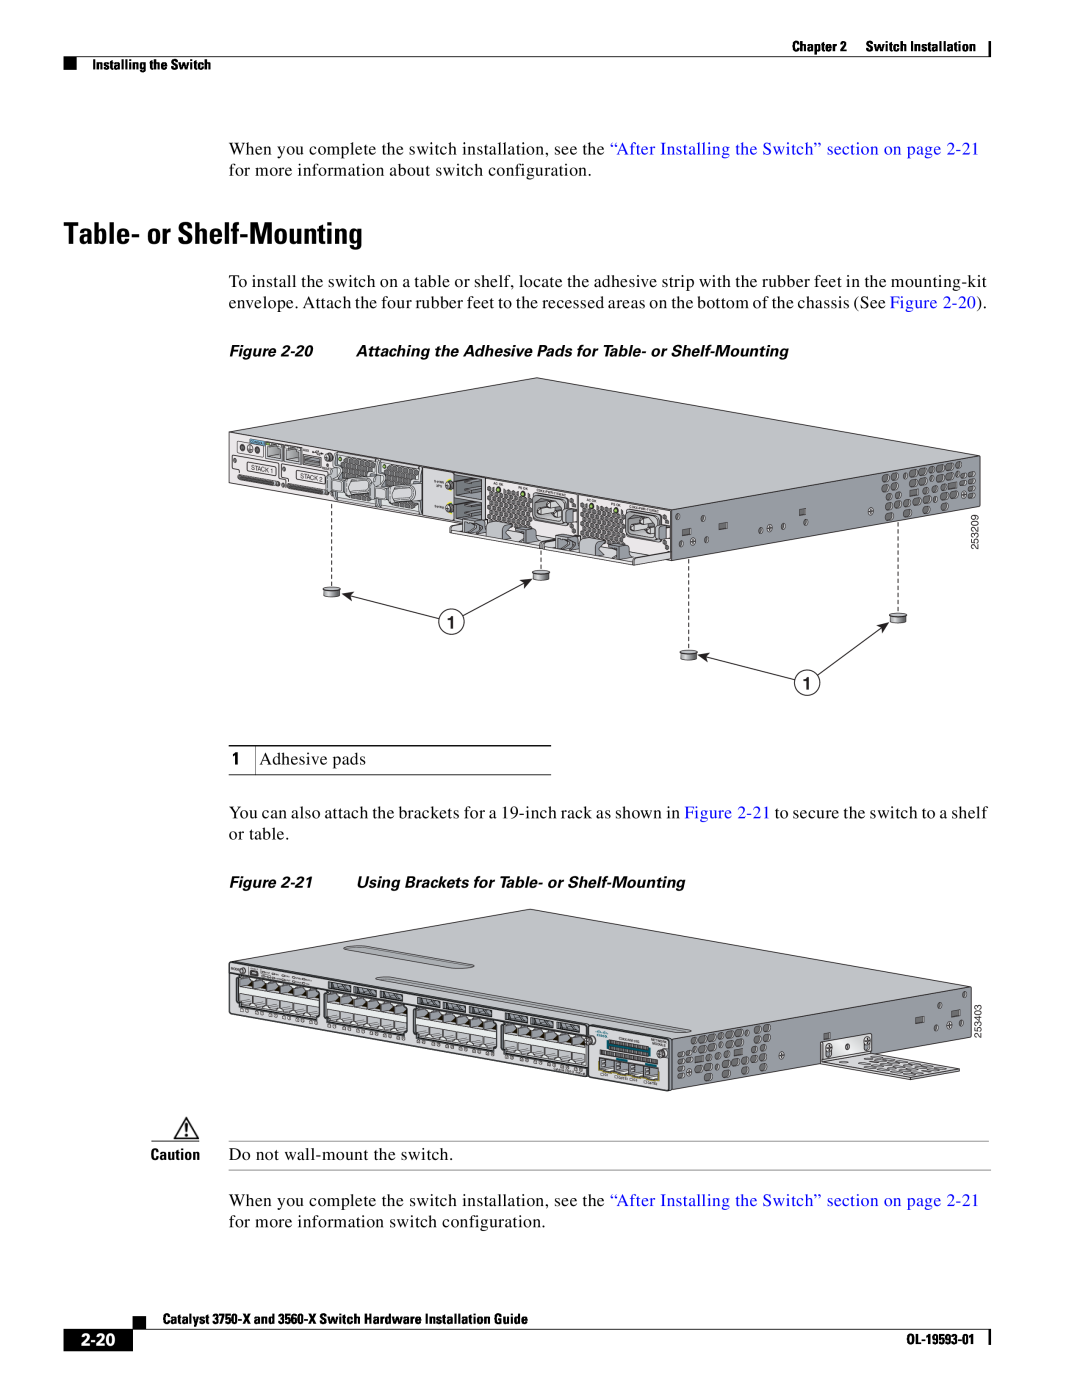 Cisco Systems 3750-X, 3560-X manual 2-20, 20 Attaching the Adhesive Pads for Table- or Shelf-Mounting 